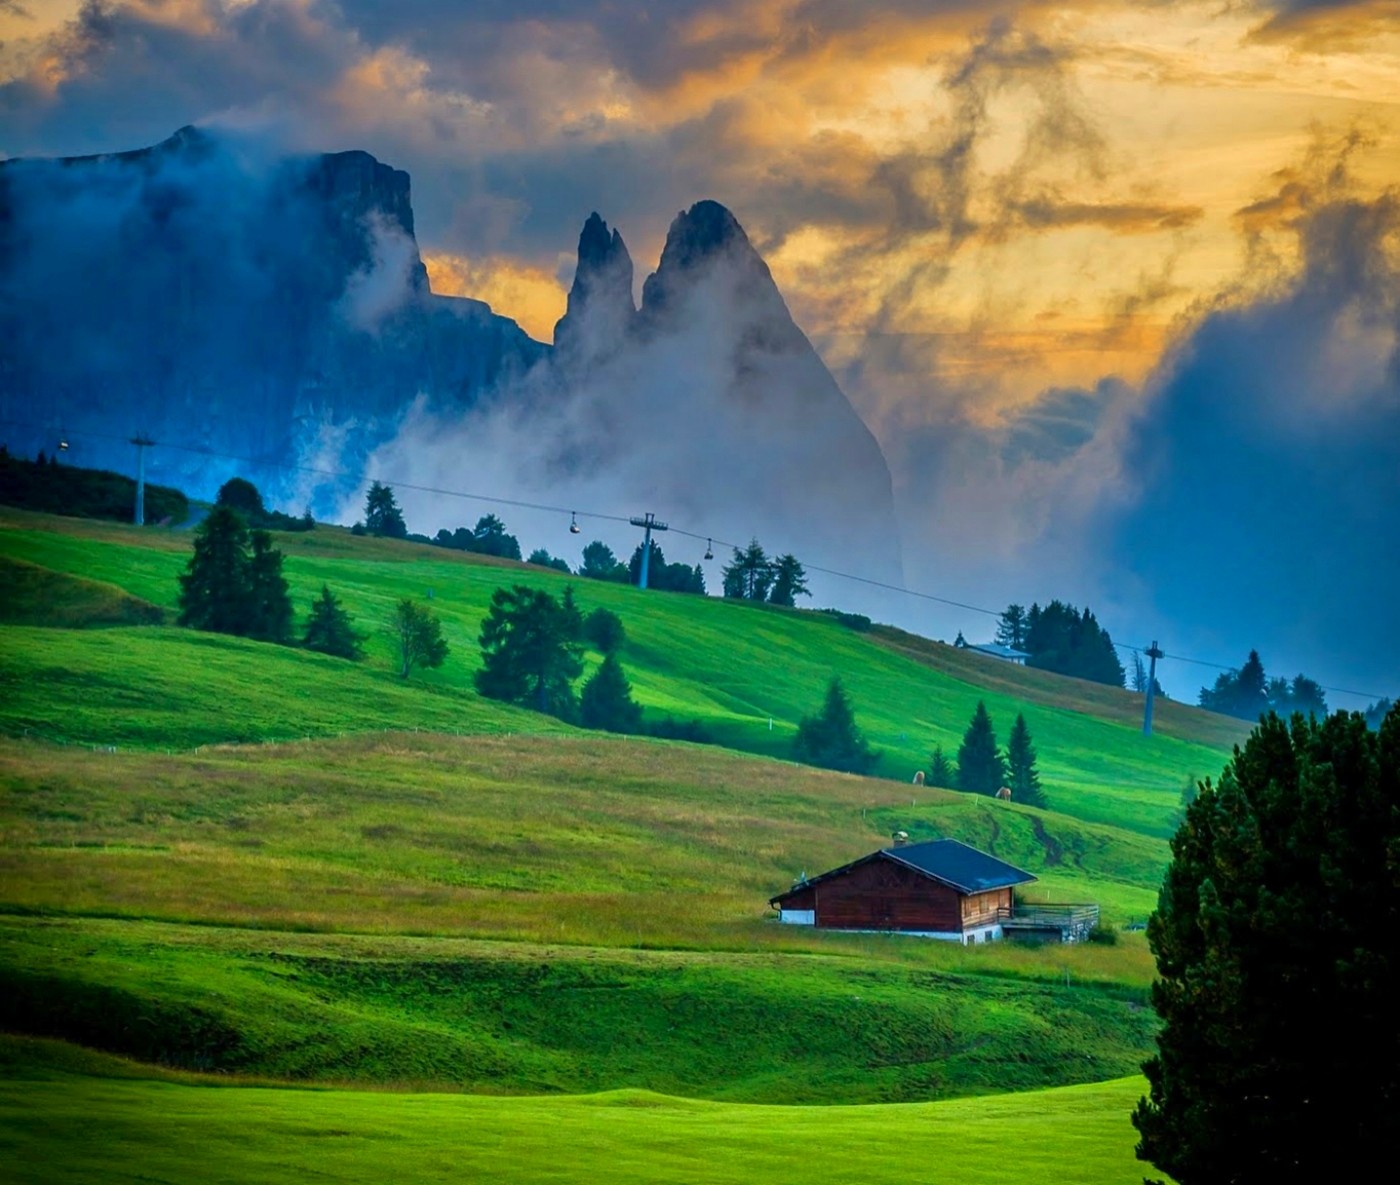 General 1400x1185 nature landscape Dolomites sunset Italy cabin clouds grass trees sky mountains